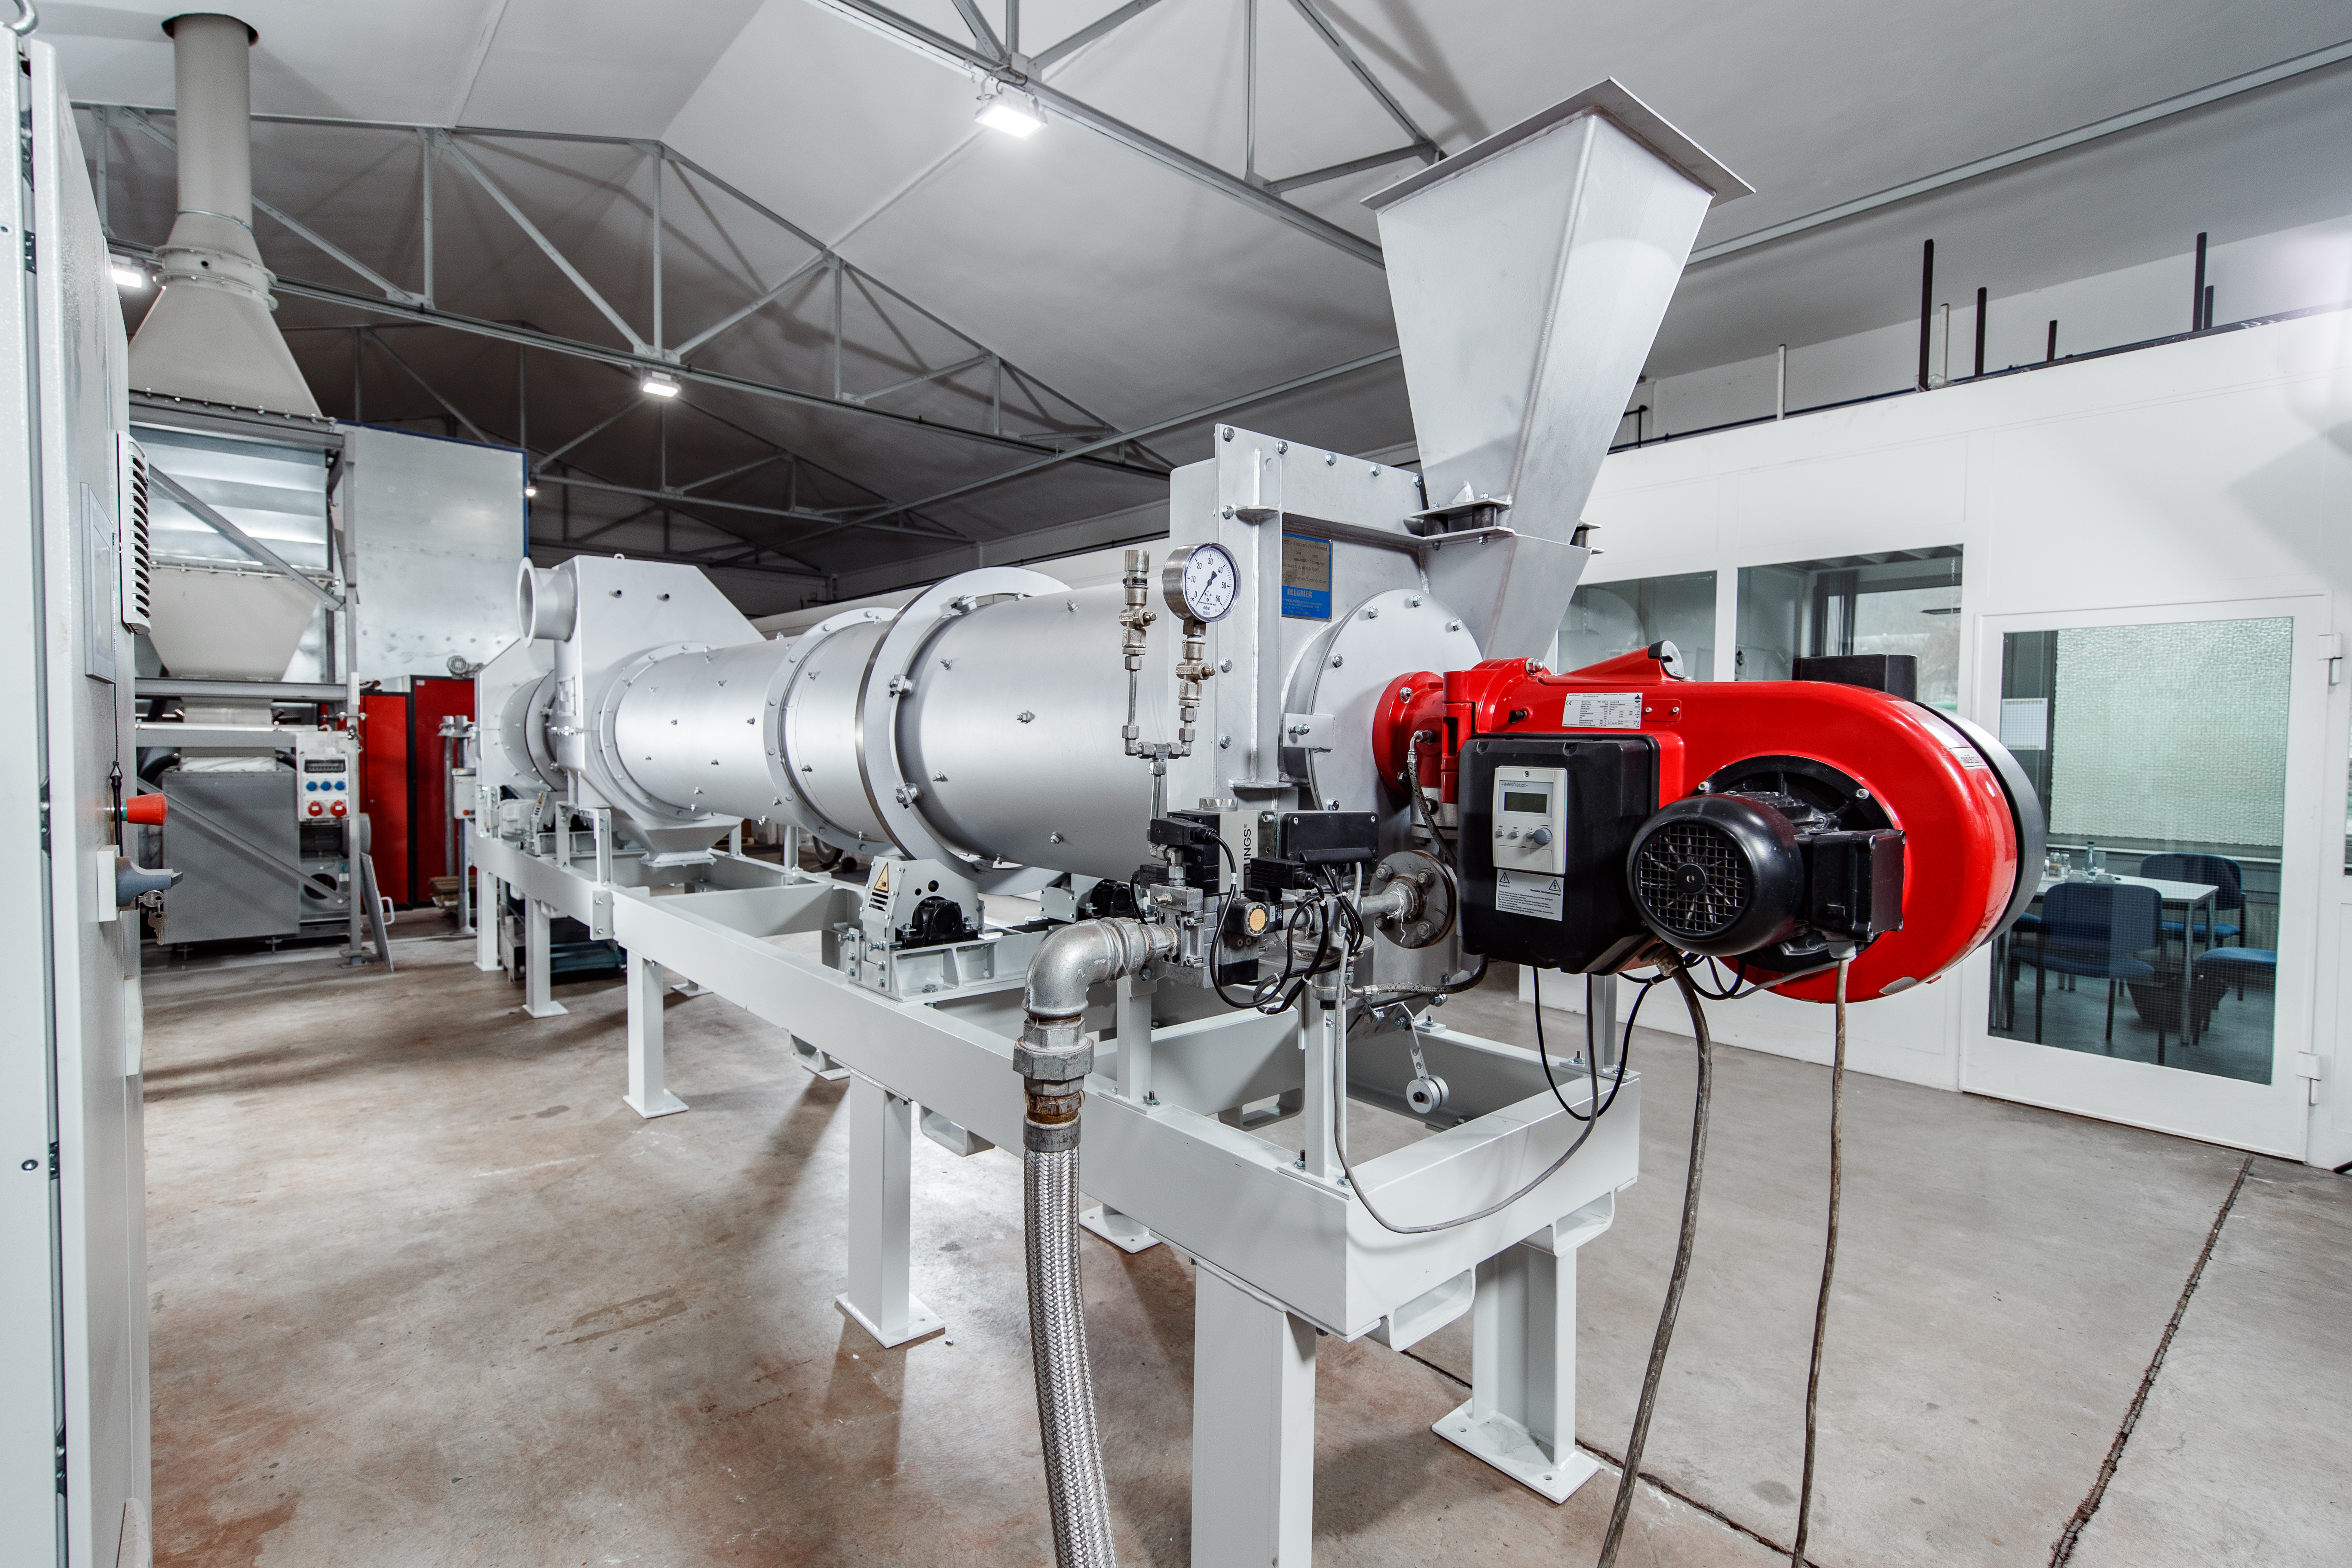 combined drum dryers-coolers mozer system for processing solids in a production hall | © Allgaier Process Technology 2022